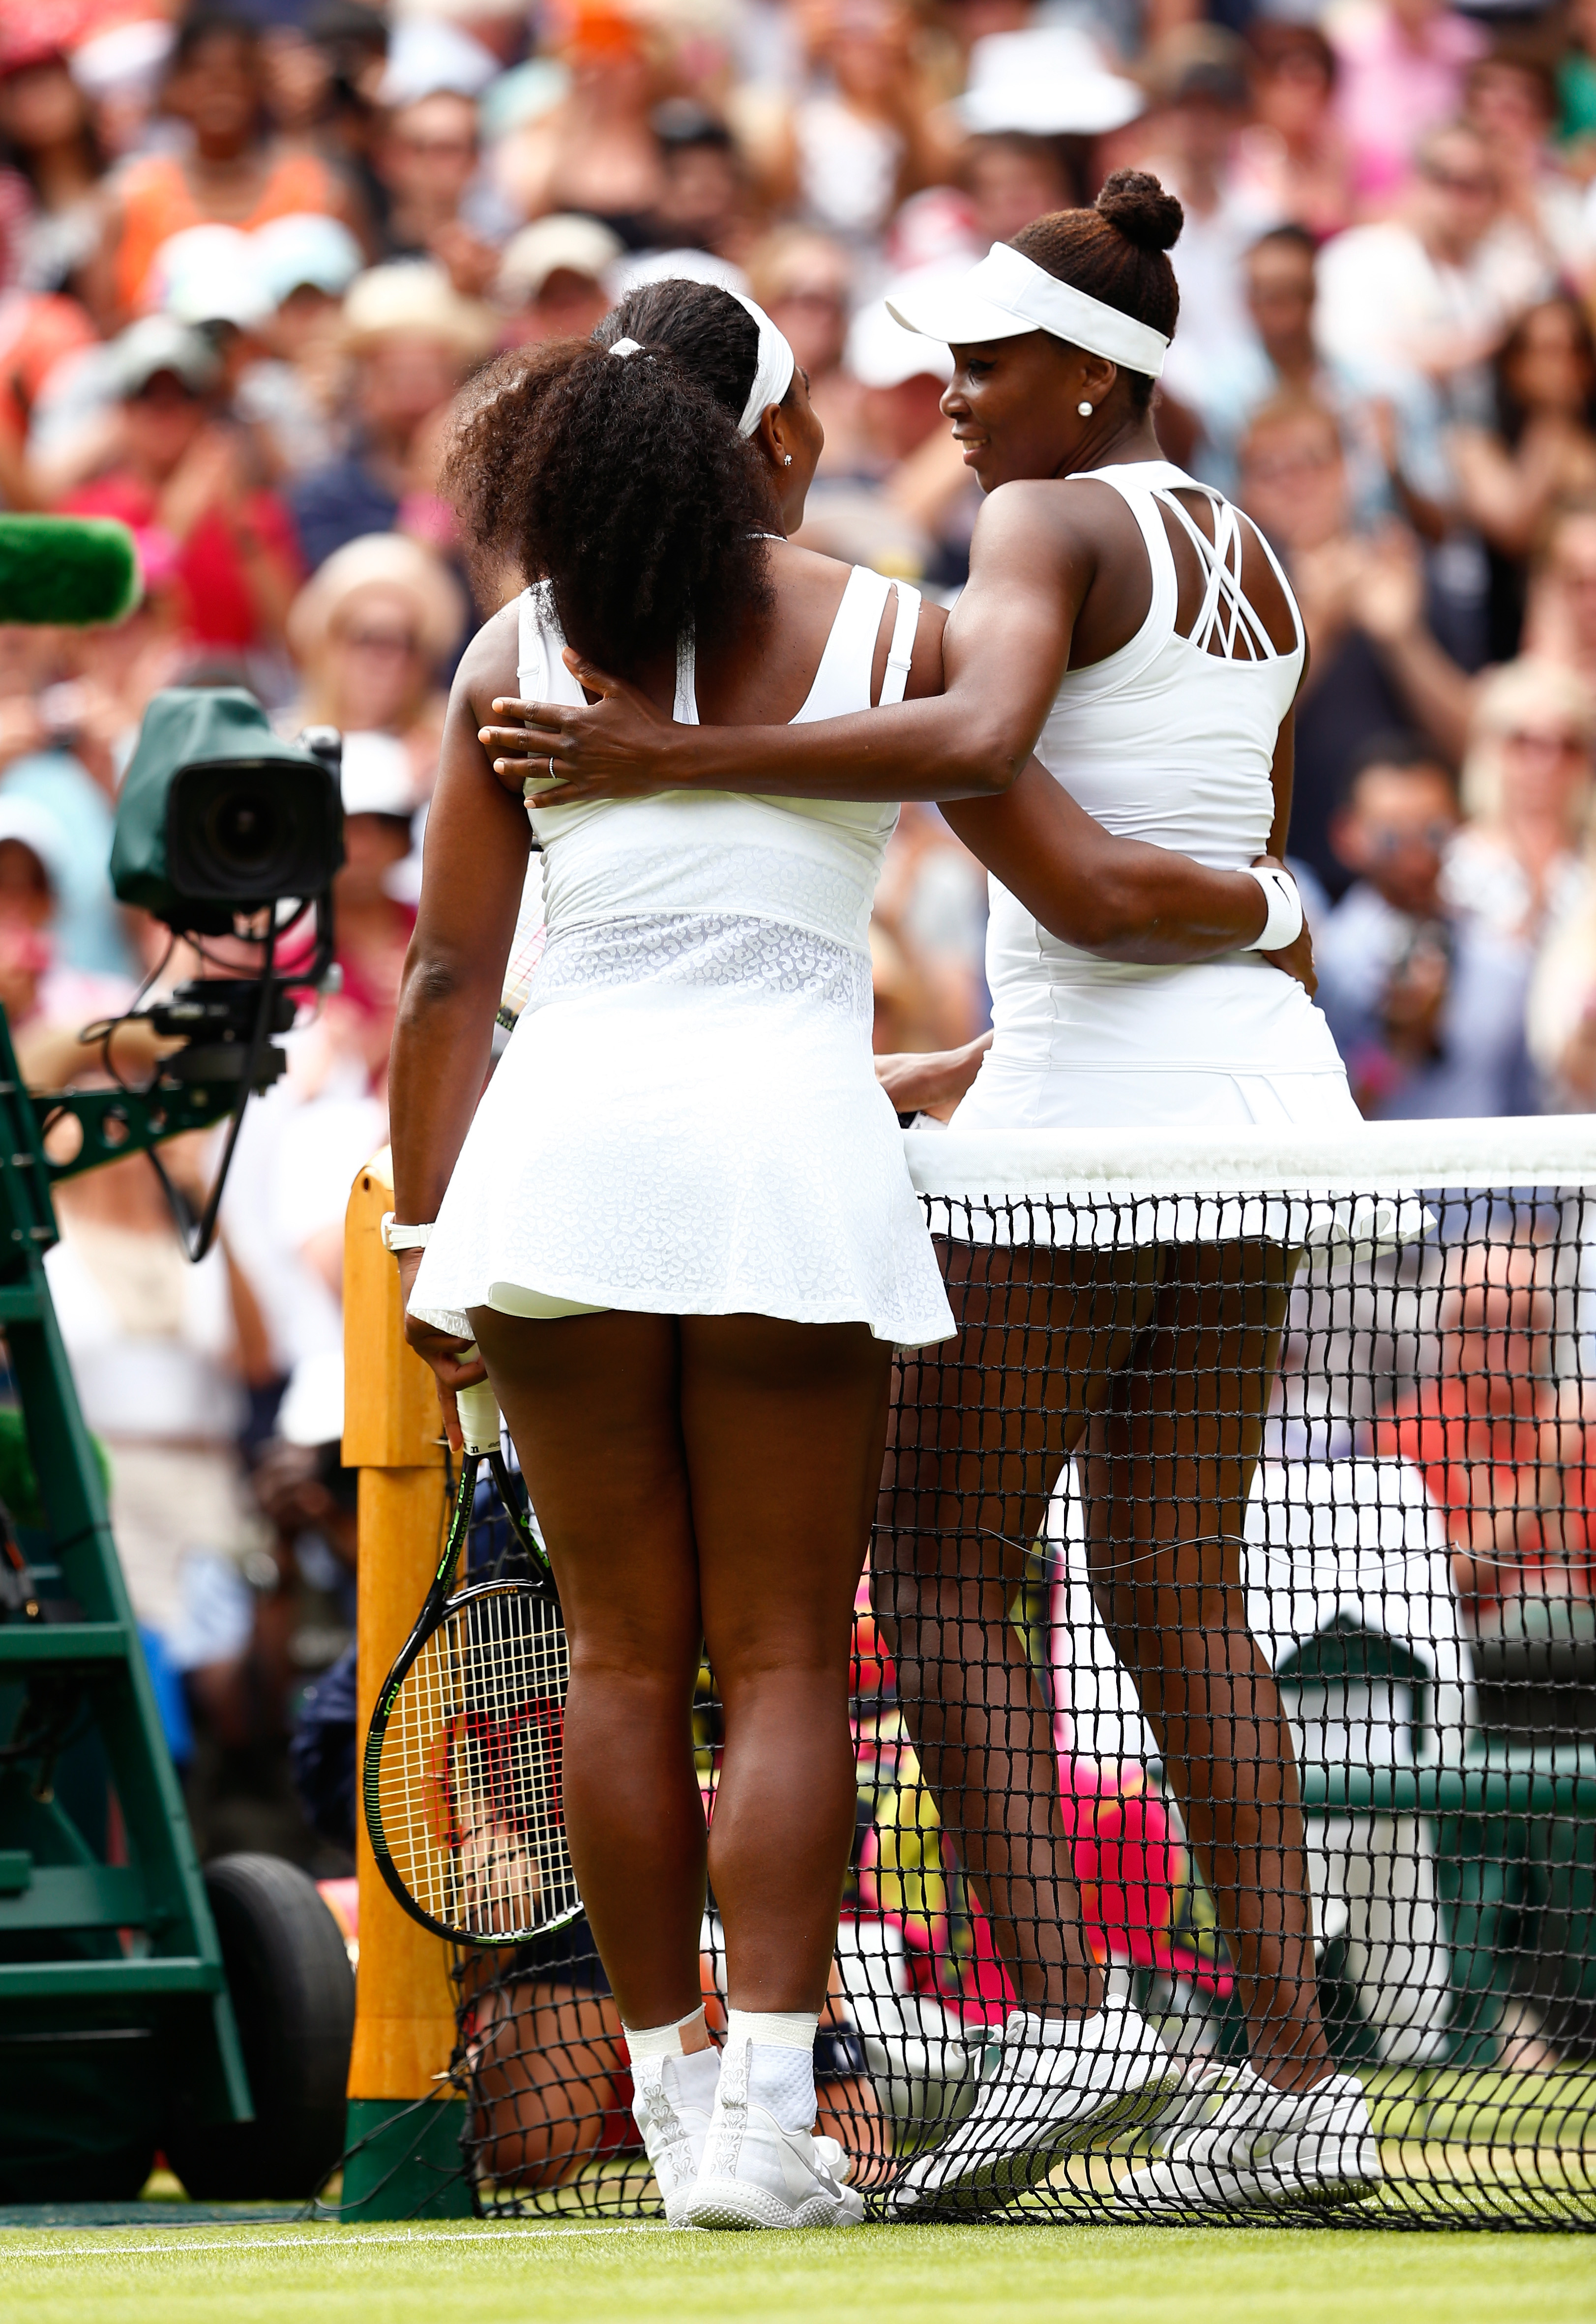 8 Lessons Every Woman Can Learn From Venus And Serena Williams